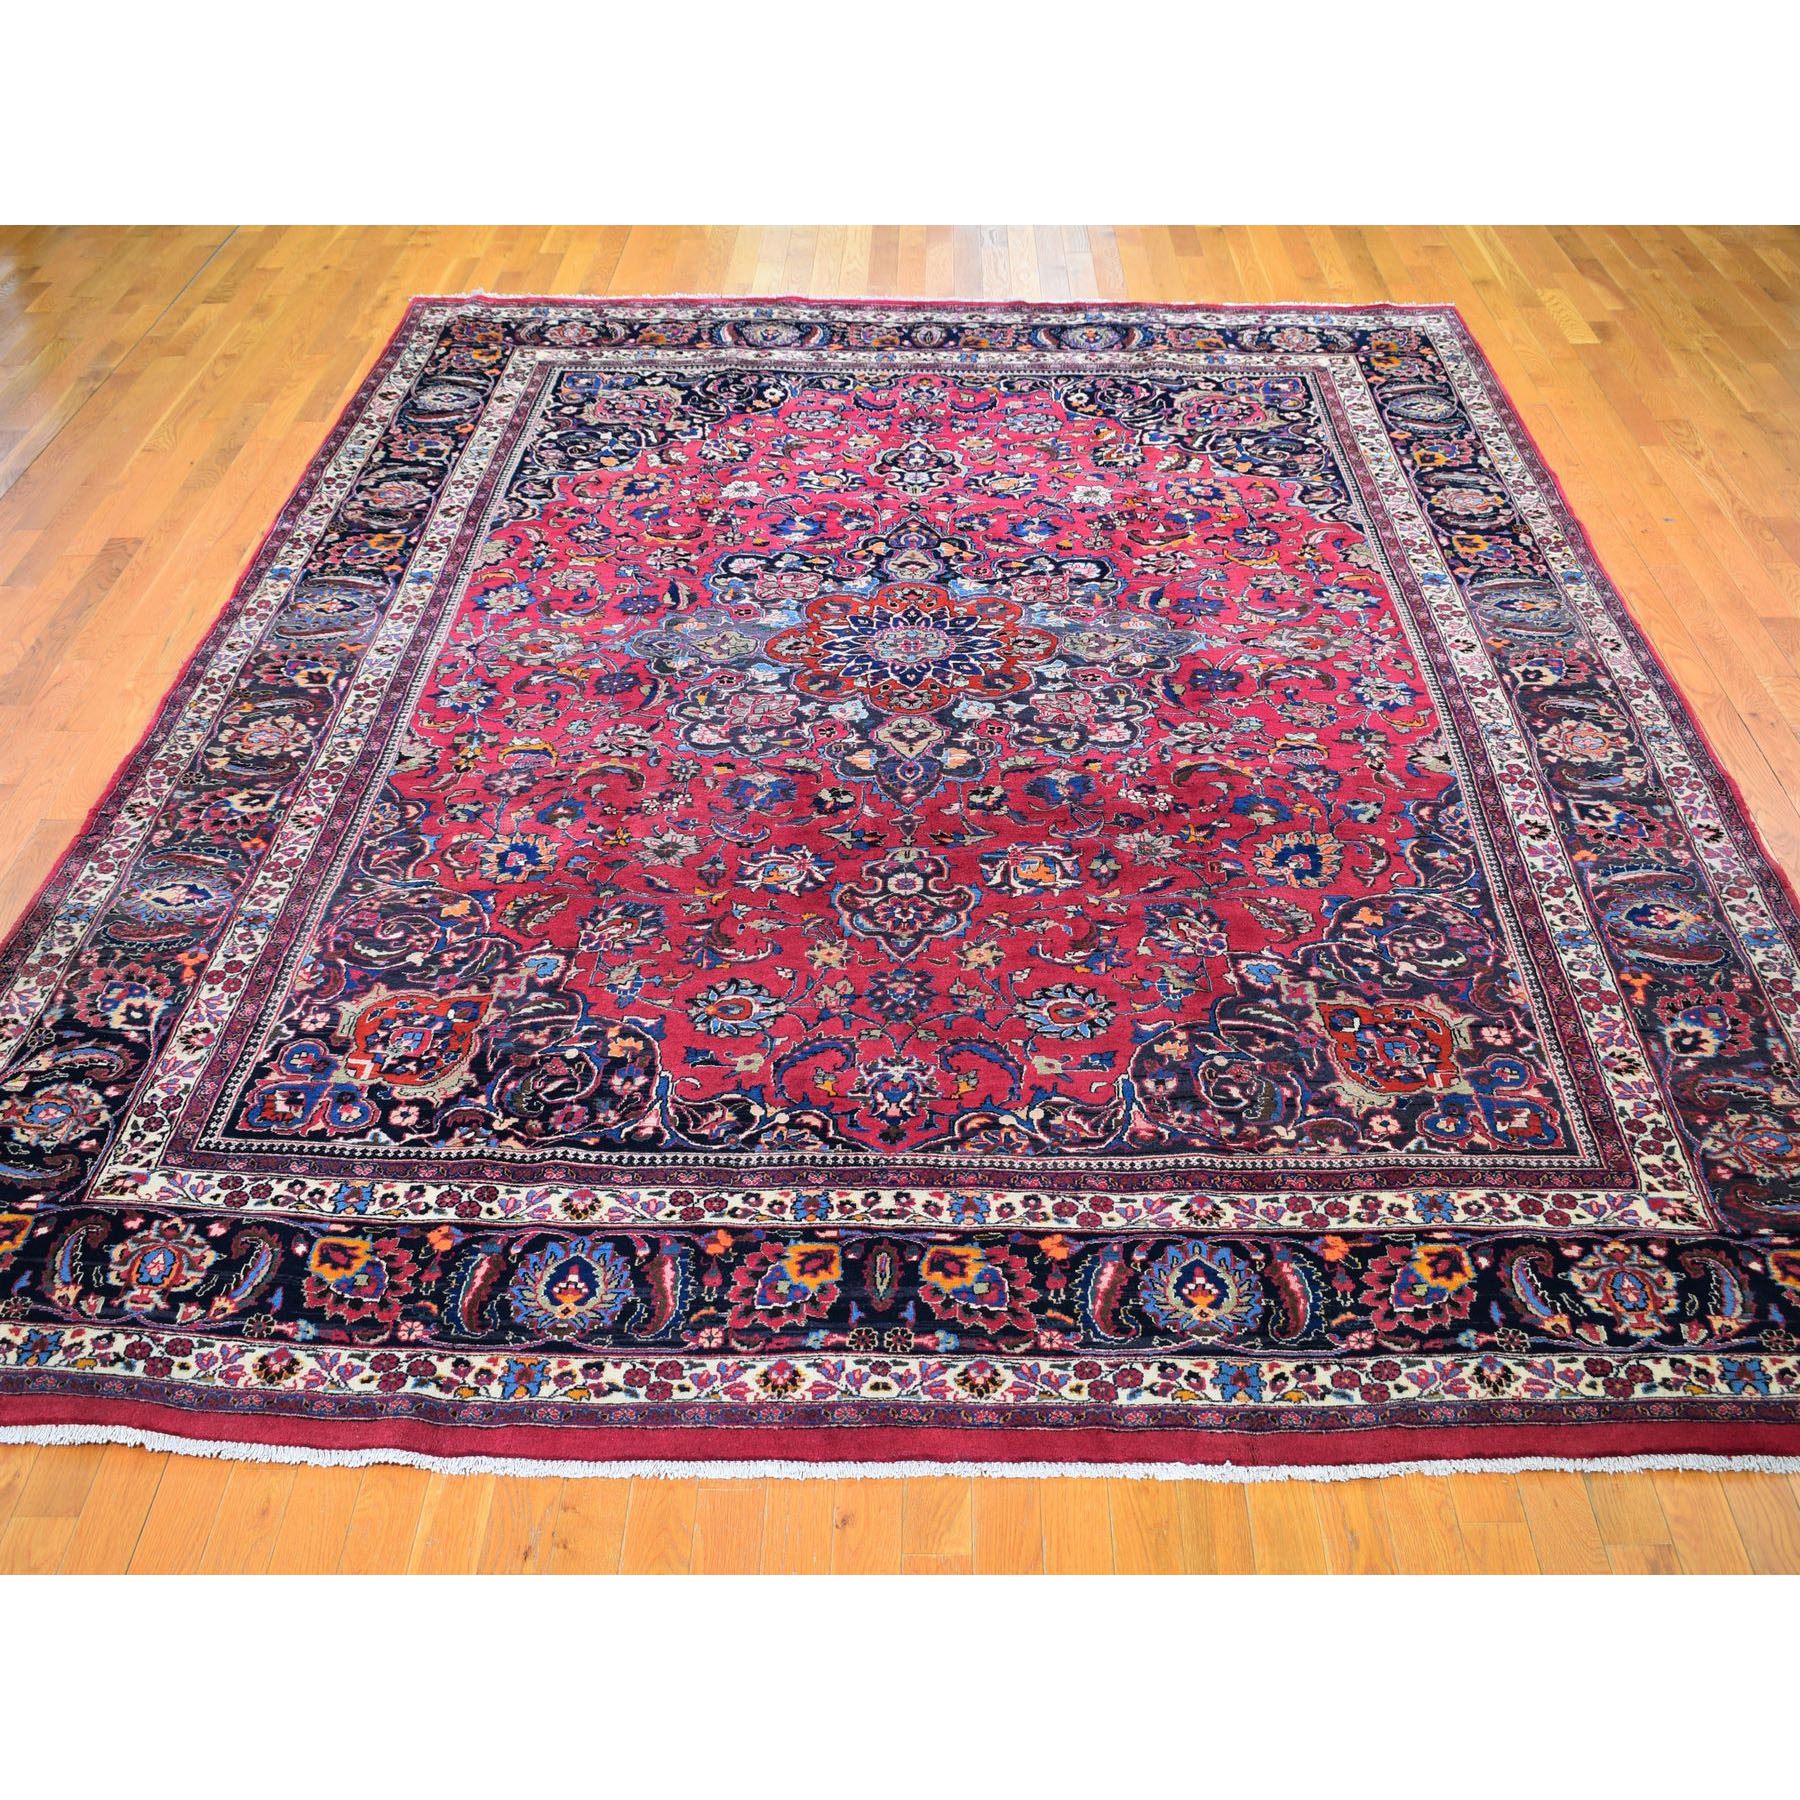 10-x13- Red Vintage Persian Mashad Clean Exc Cond Hand Knotted Oriental Rug 